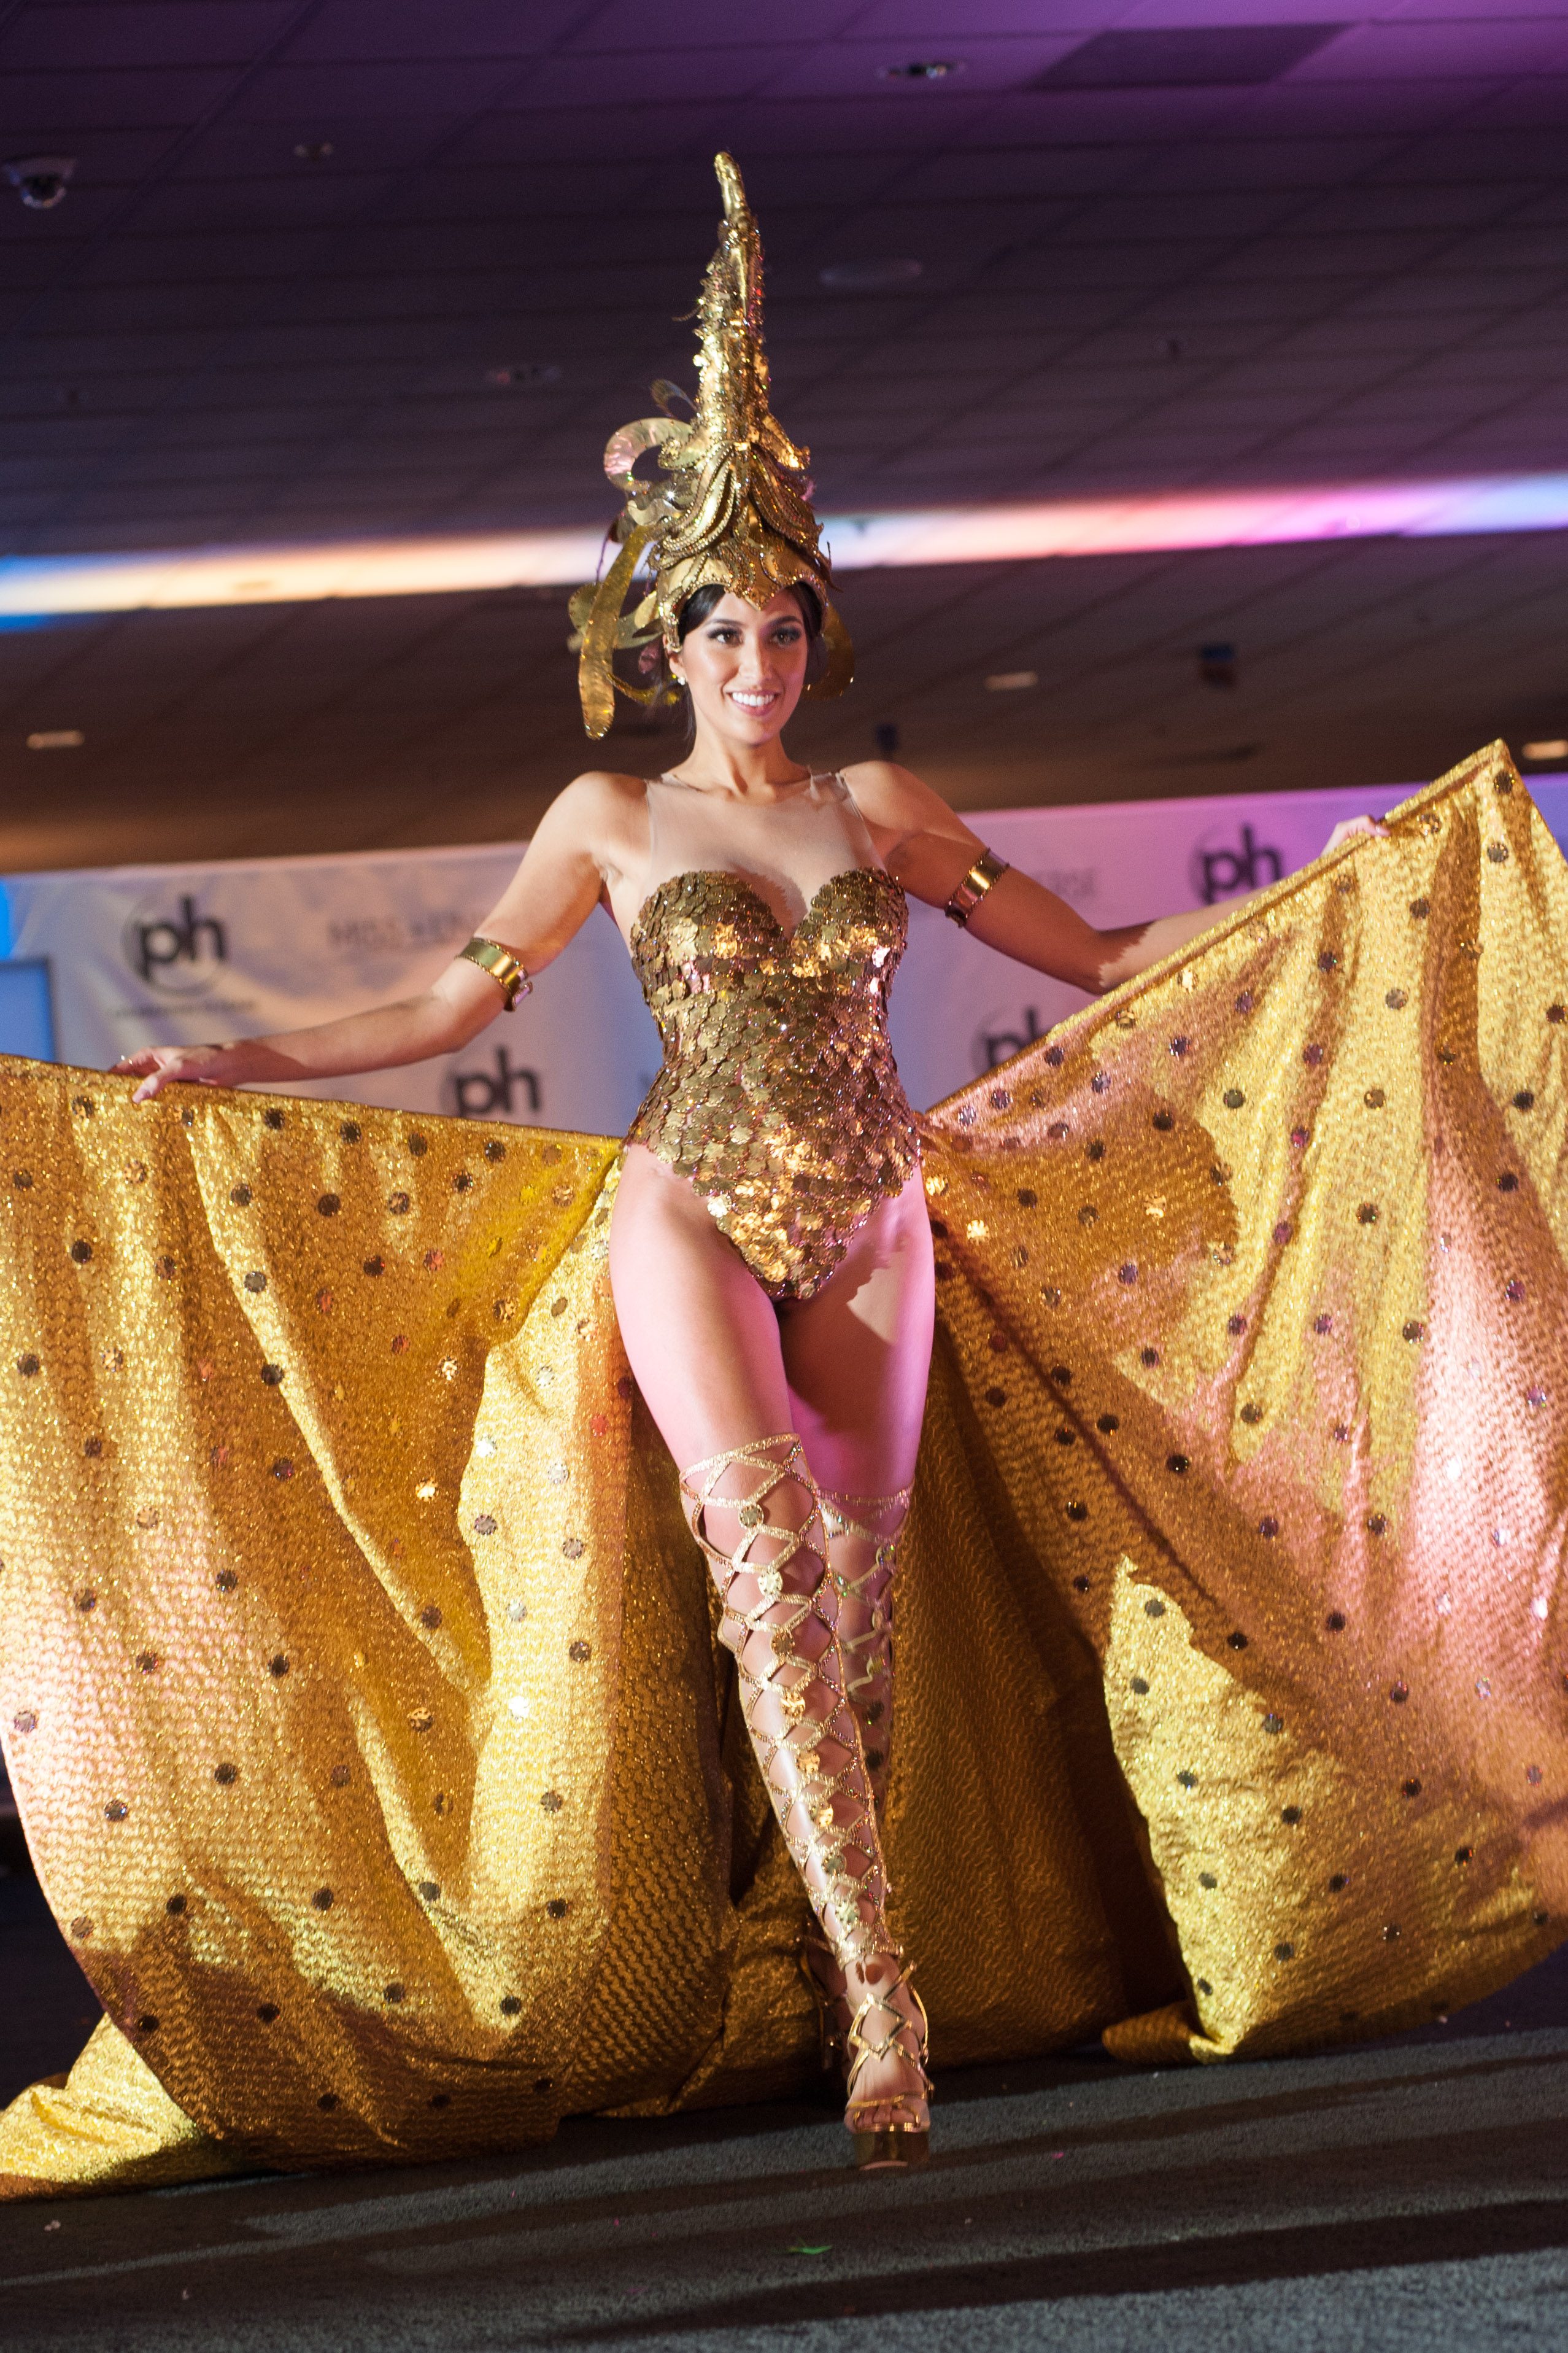 Rachel Peters, debuts her National Costume on stage at Planet Hollywood Resort & Casino on November 18, 2017. The National Costume Show is an international tradition where contestants display an authentic costume of choice that best represents the culture of their home country. Photo by HO/The Miss Universe Organization 